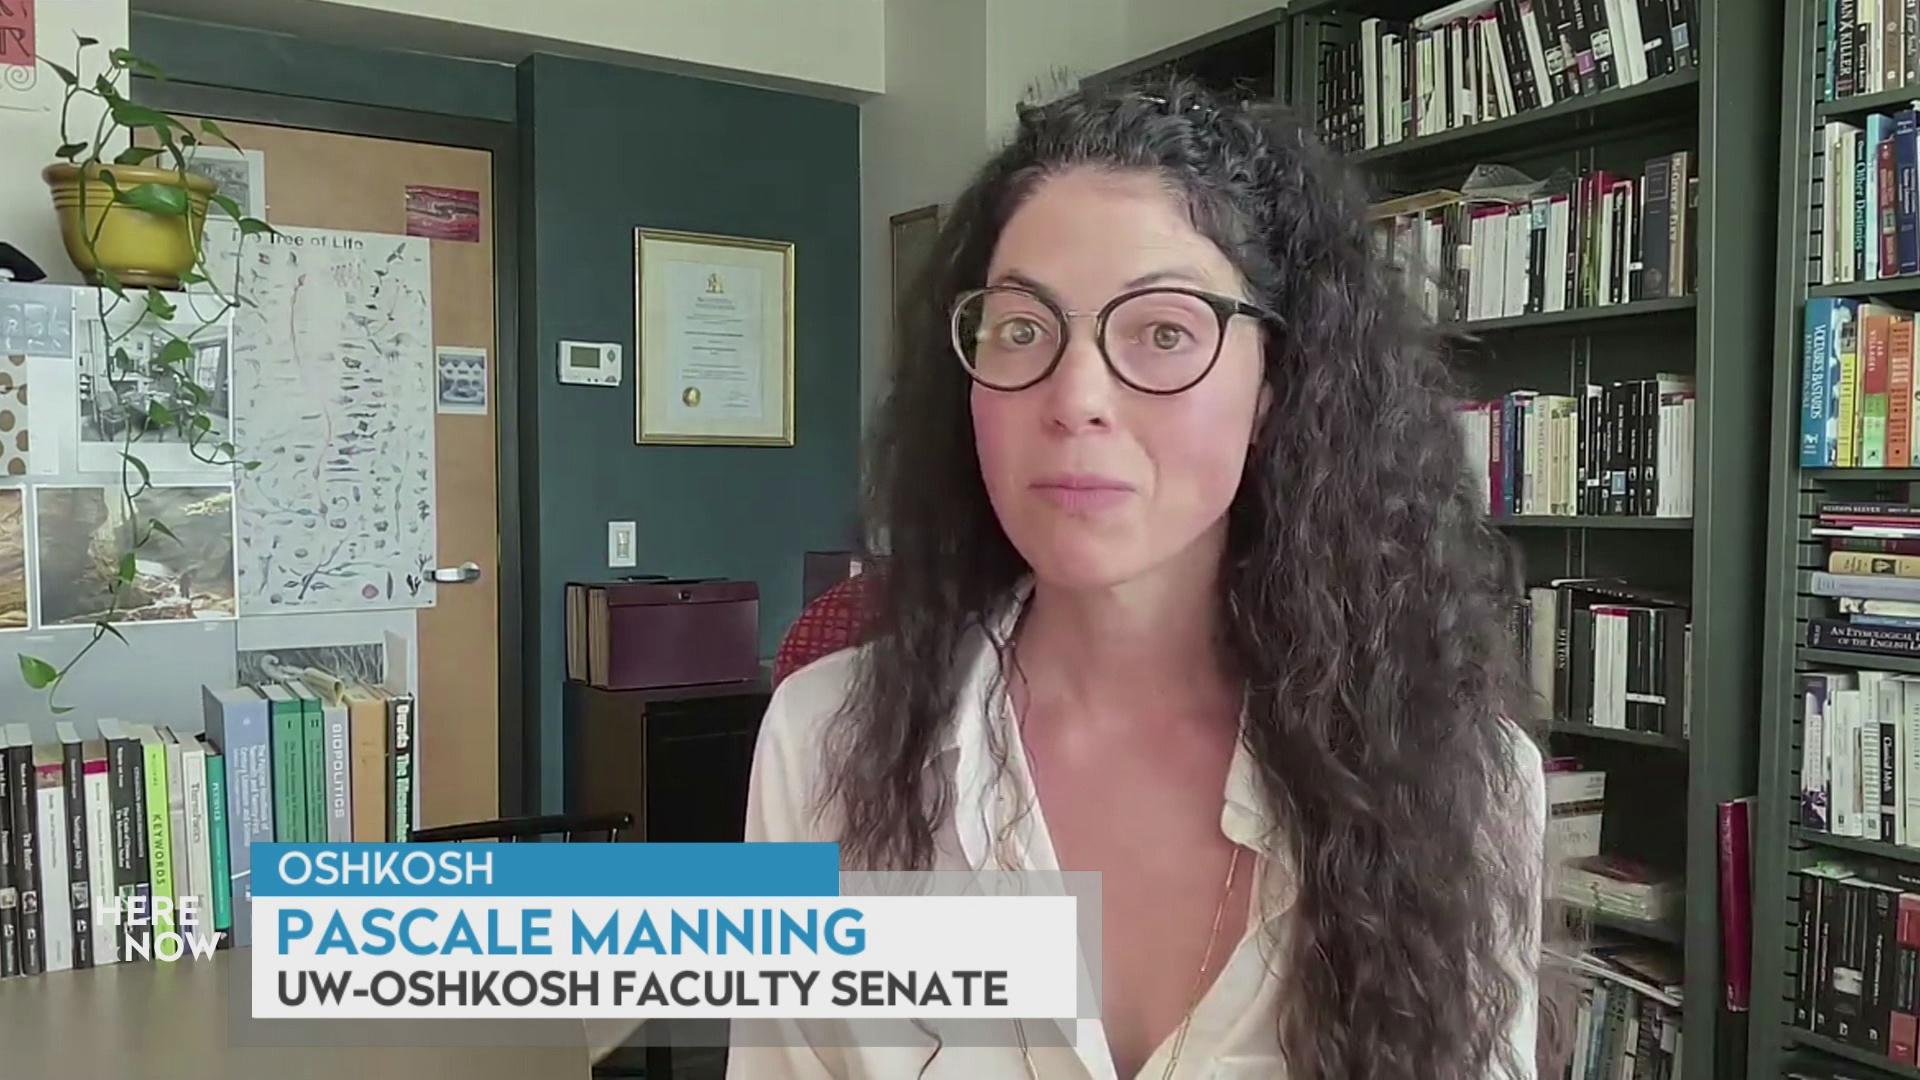 A still image from a video shows Pascale Manning seated in front of a wooden bookshelf filled with books and a green wall with maps and artwork with a graphic at bottom reading 'Oshkosh,' 'Pascale Manning' and 'UW-Oshkosh Faculty Senate.'